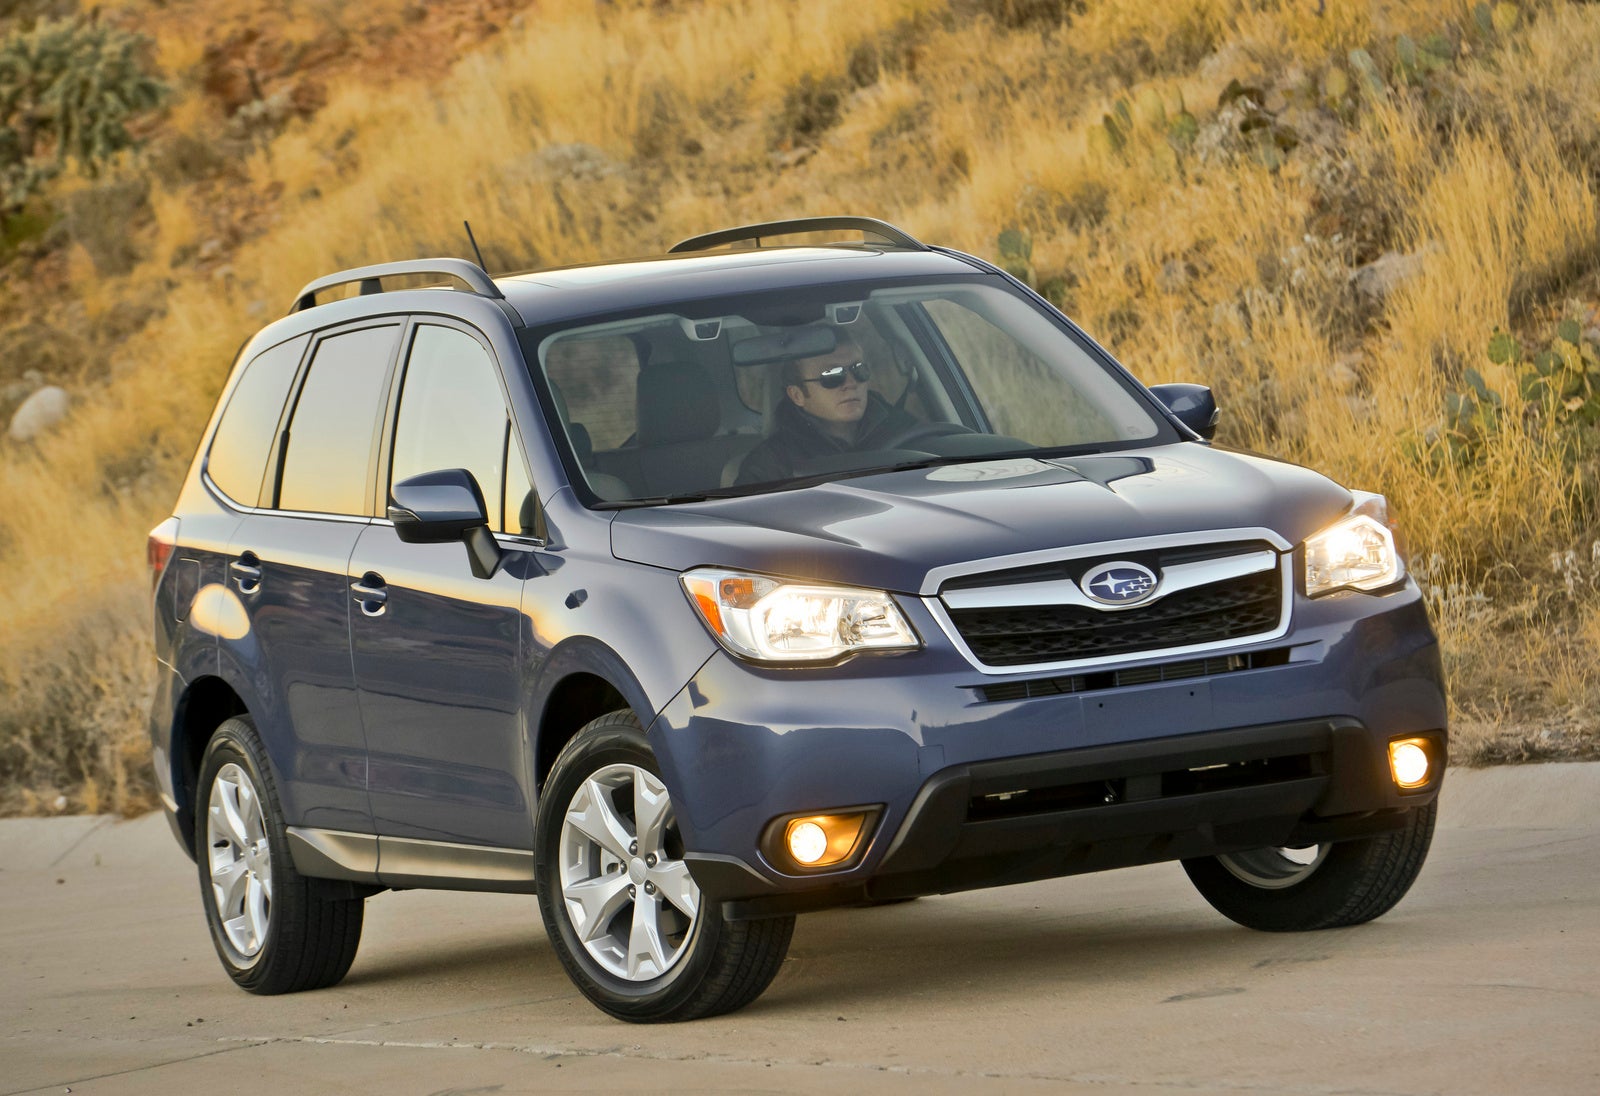 2014 Subaru Forester for Sale in North Bay ON CarGurus ca